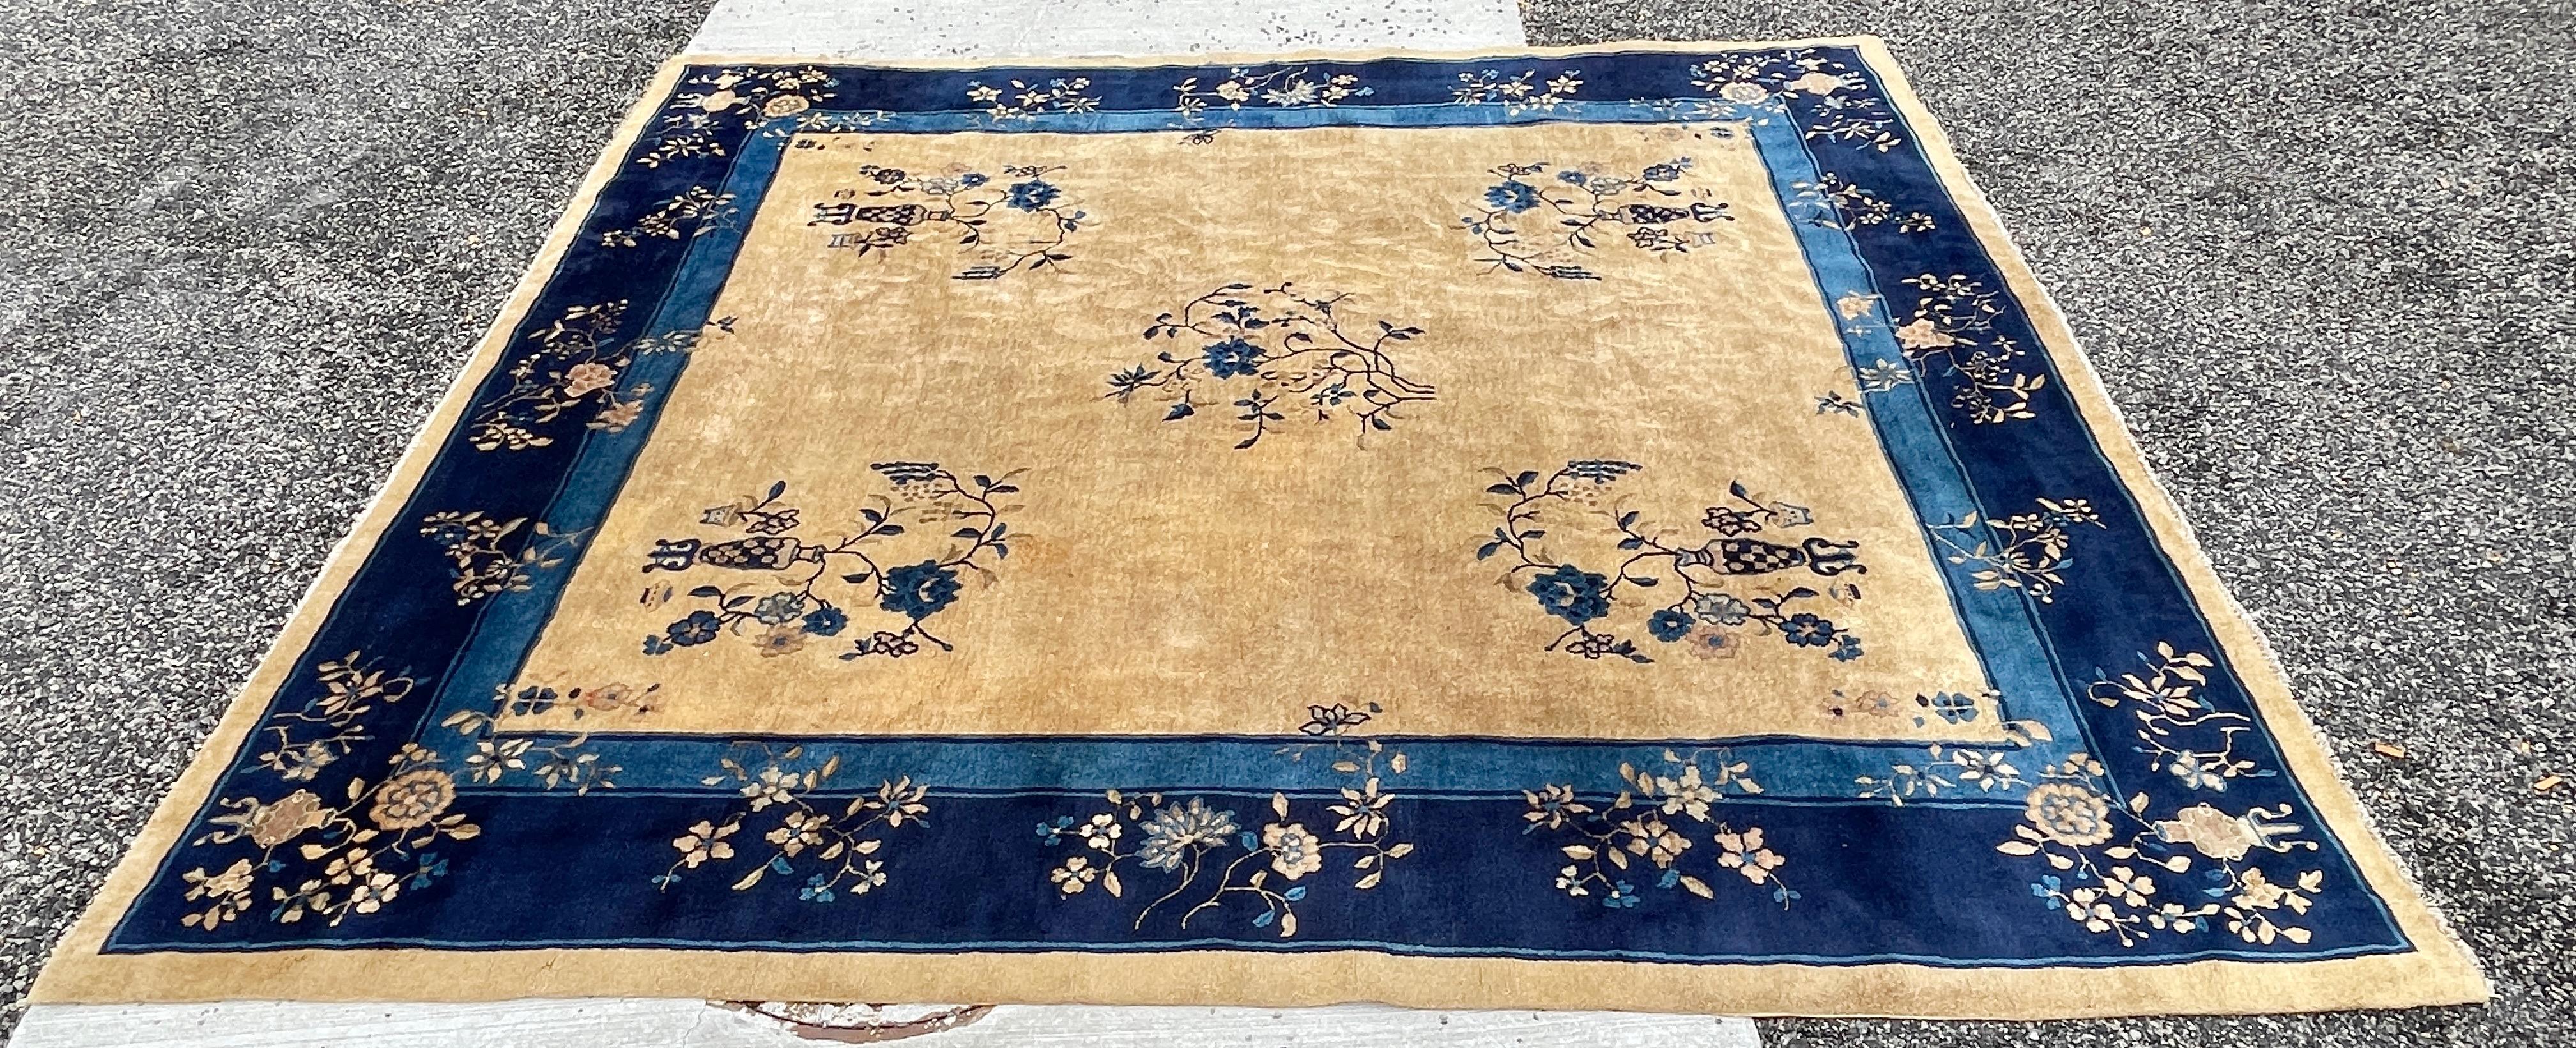 1920's Peking Chinese Art Deco Rug 9' x 10' In Fair Condition For Sale In Hanover, MA